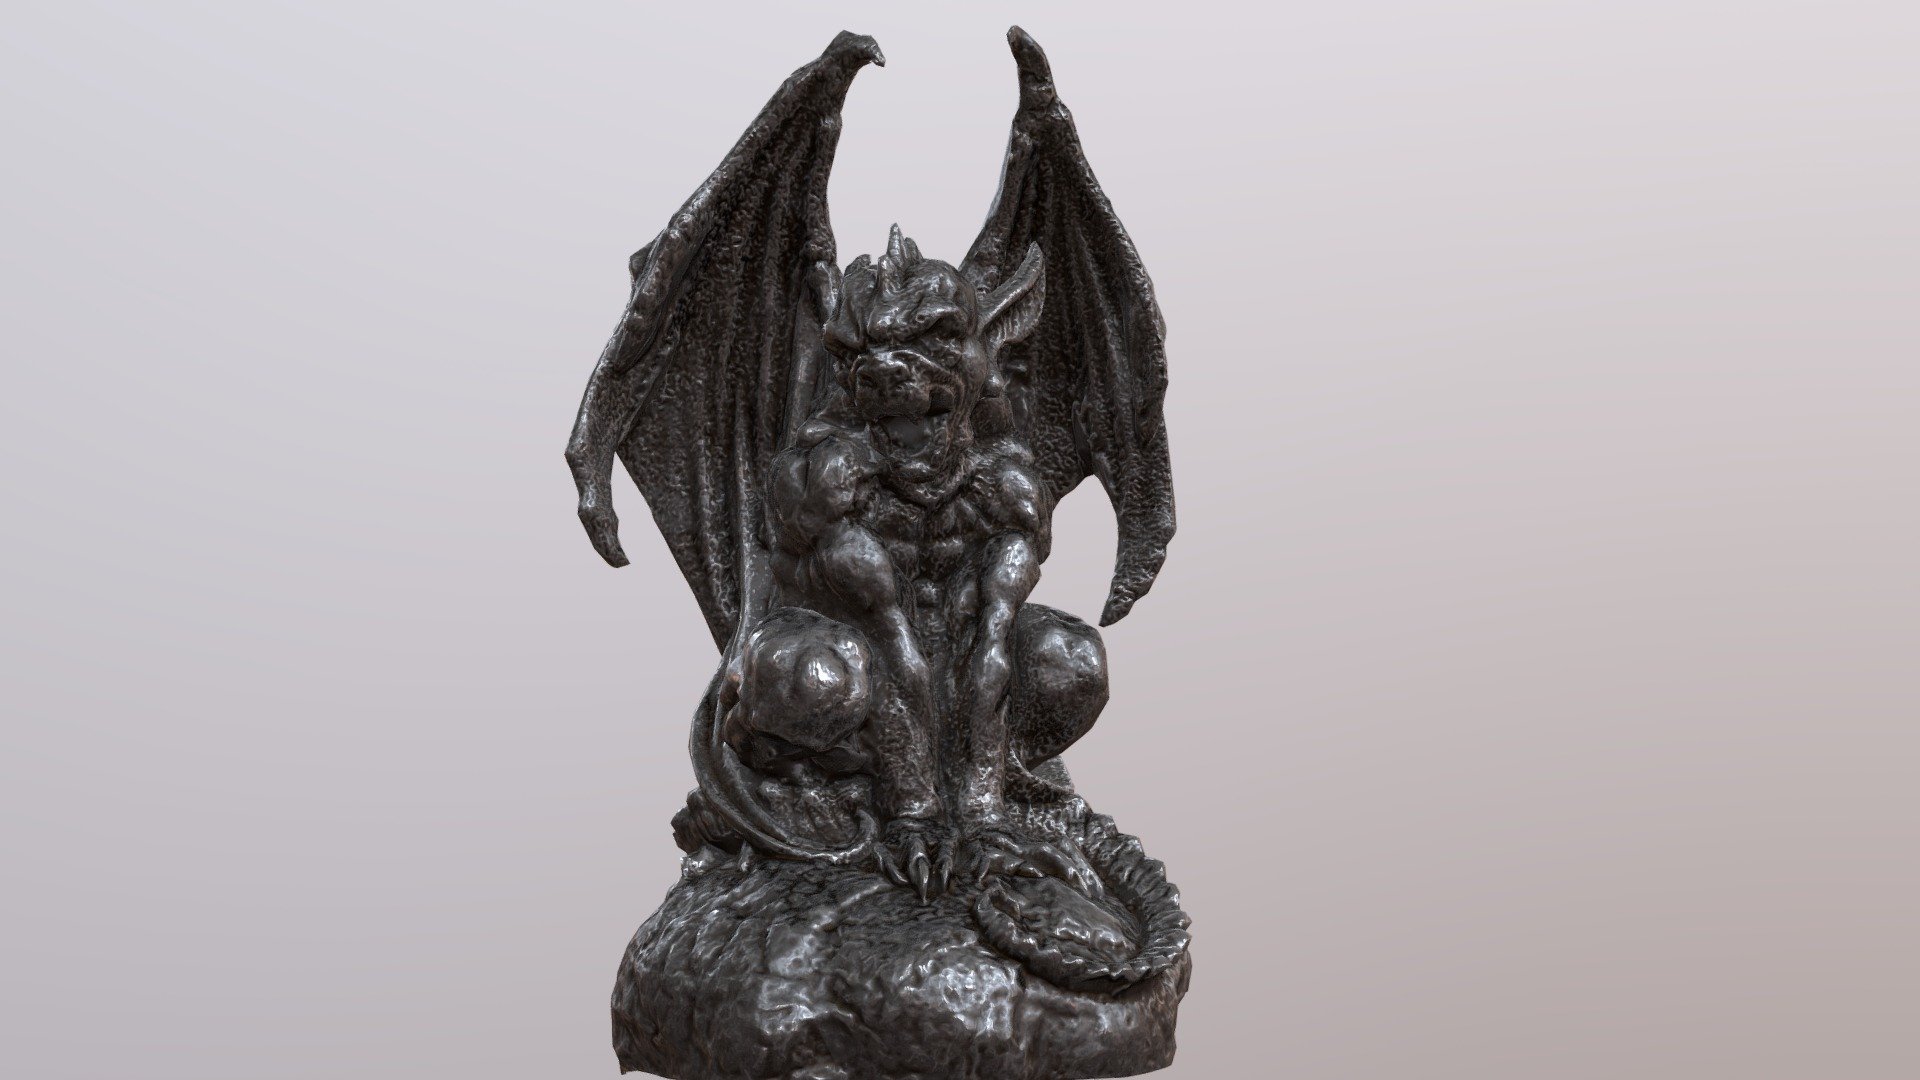 Gargoyle Statue made from 3d scanning via Agisoft and textured in Substance Painter 3d model